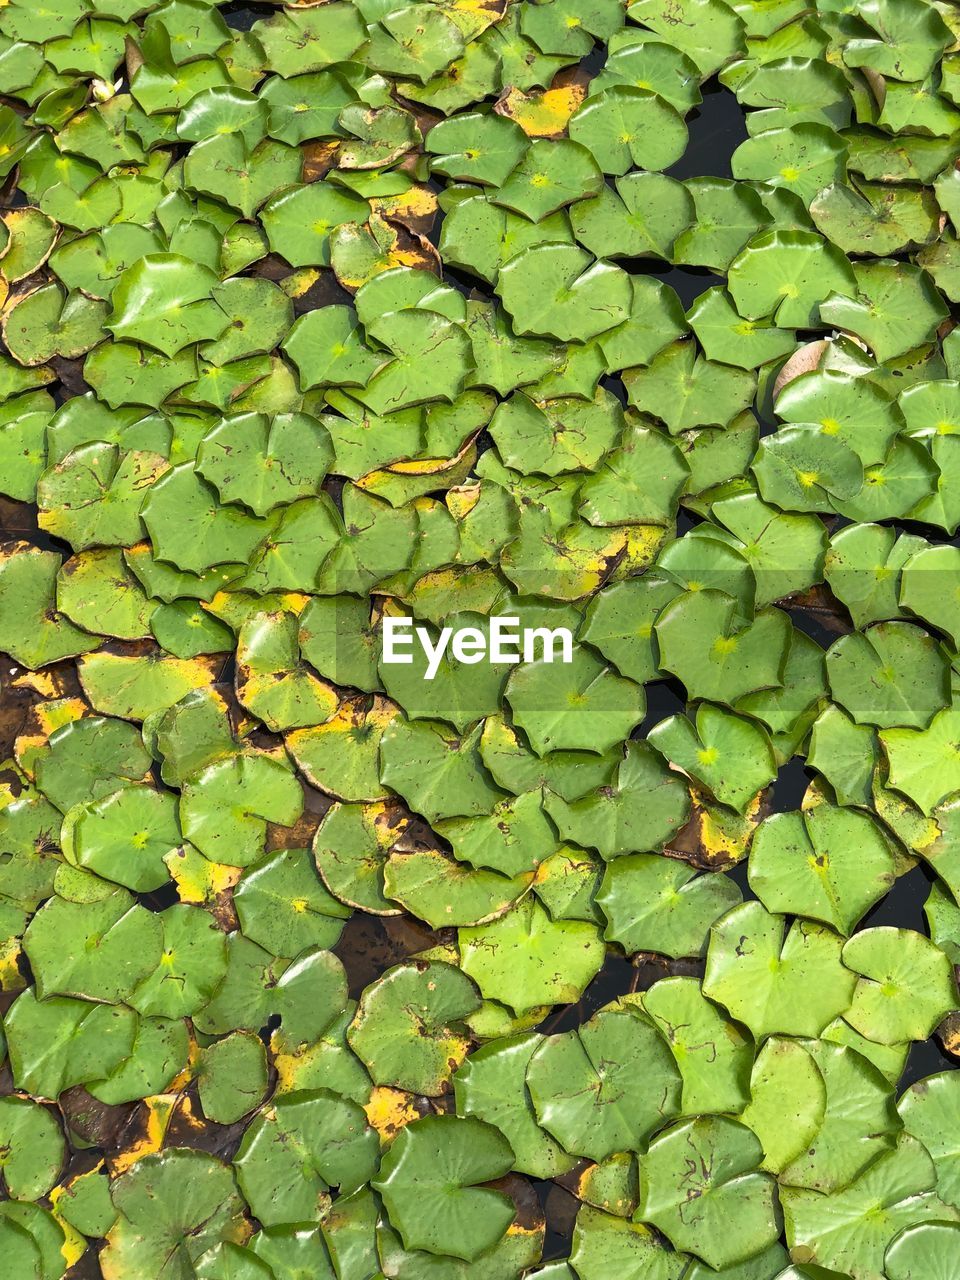 CLOSE-UP OF LEAVES FLOATING ON WATER